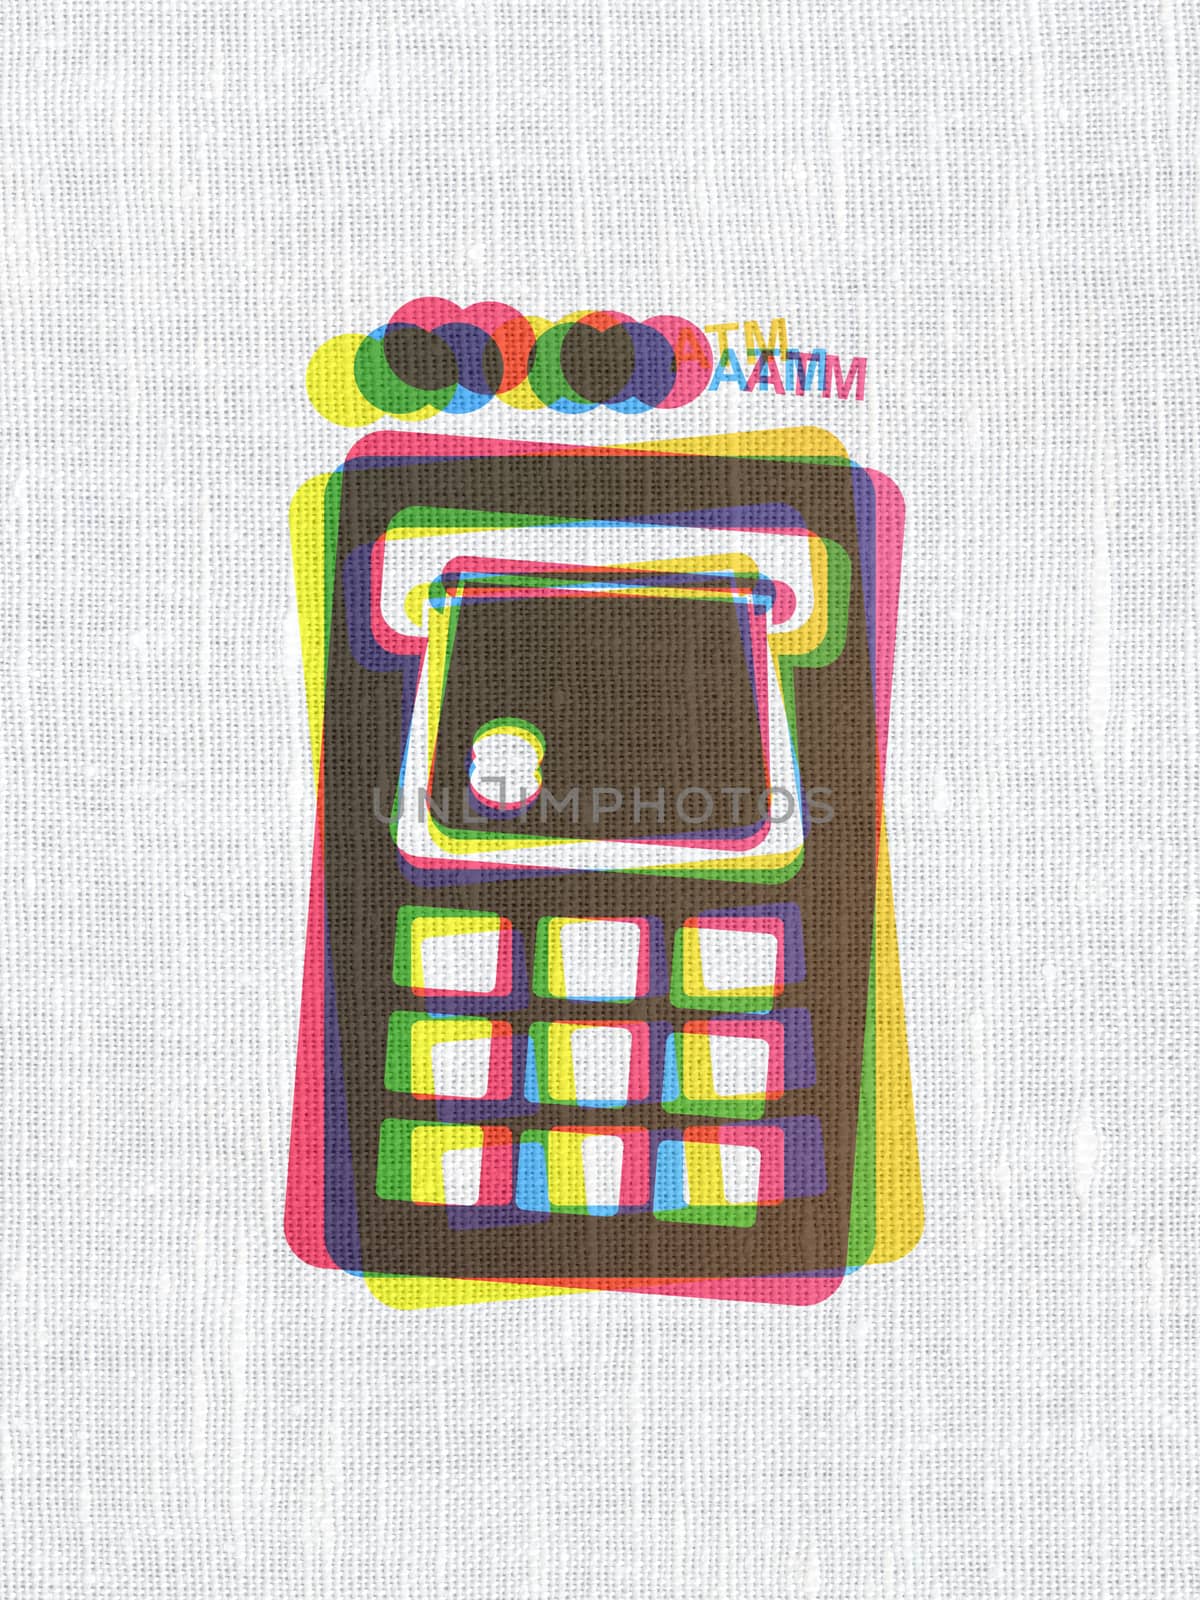 Currency concept: CMYK ATM Machine on linen fabric texture background